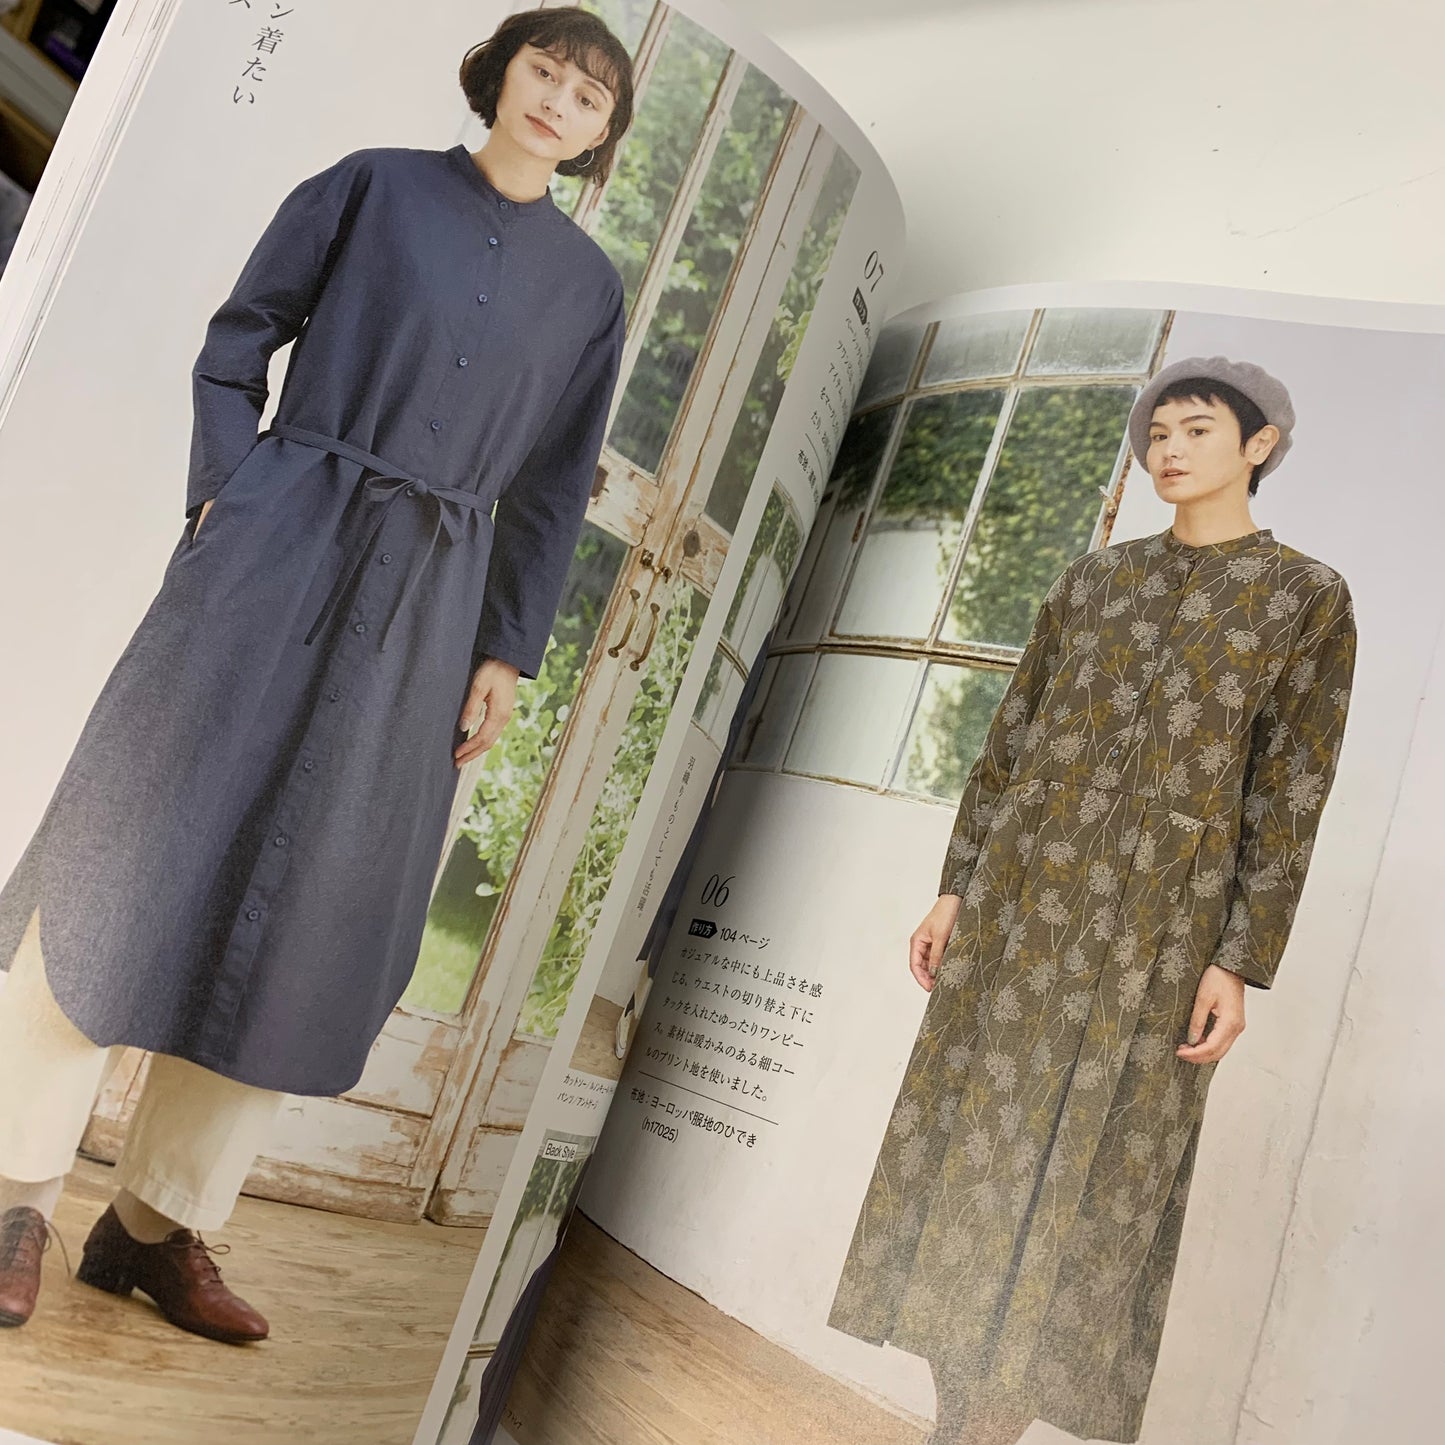 Japan | Japan | Easy sewing for adults 2022-2023 autumn winter 成人服裝容易縫製2022-2023秋冬